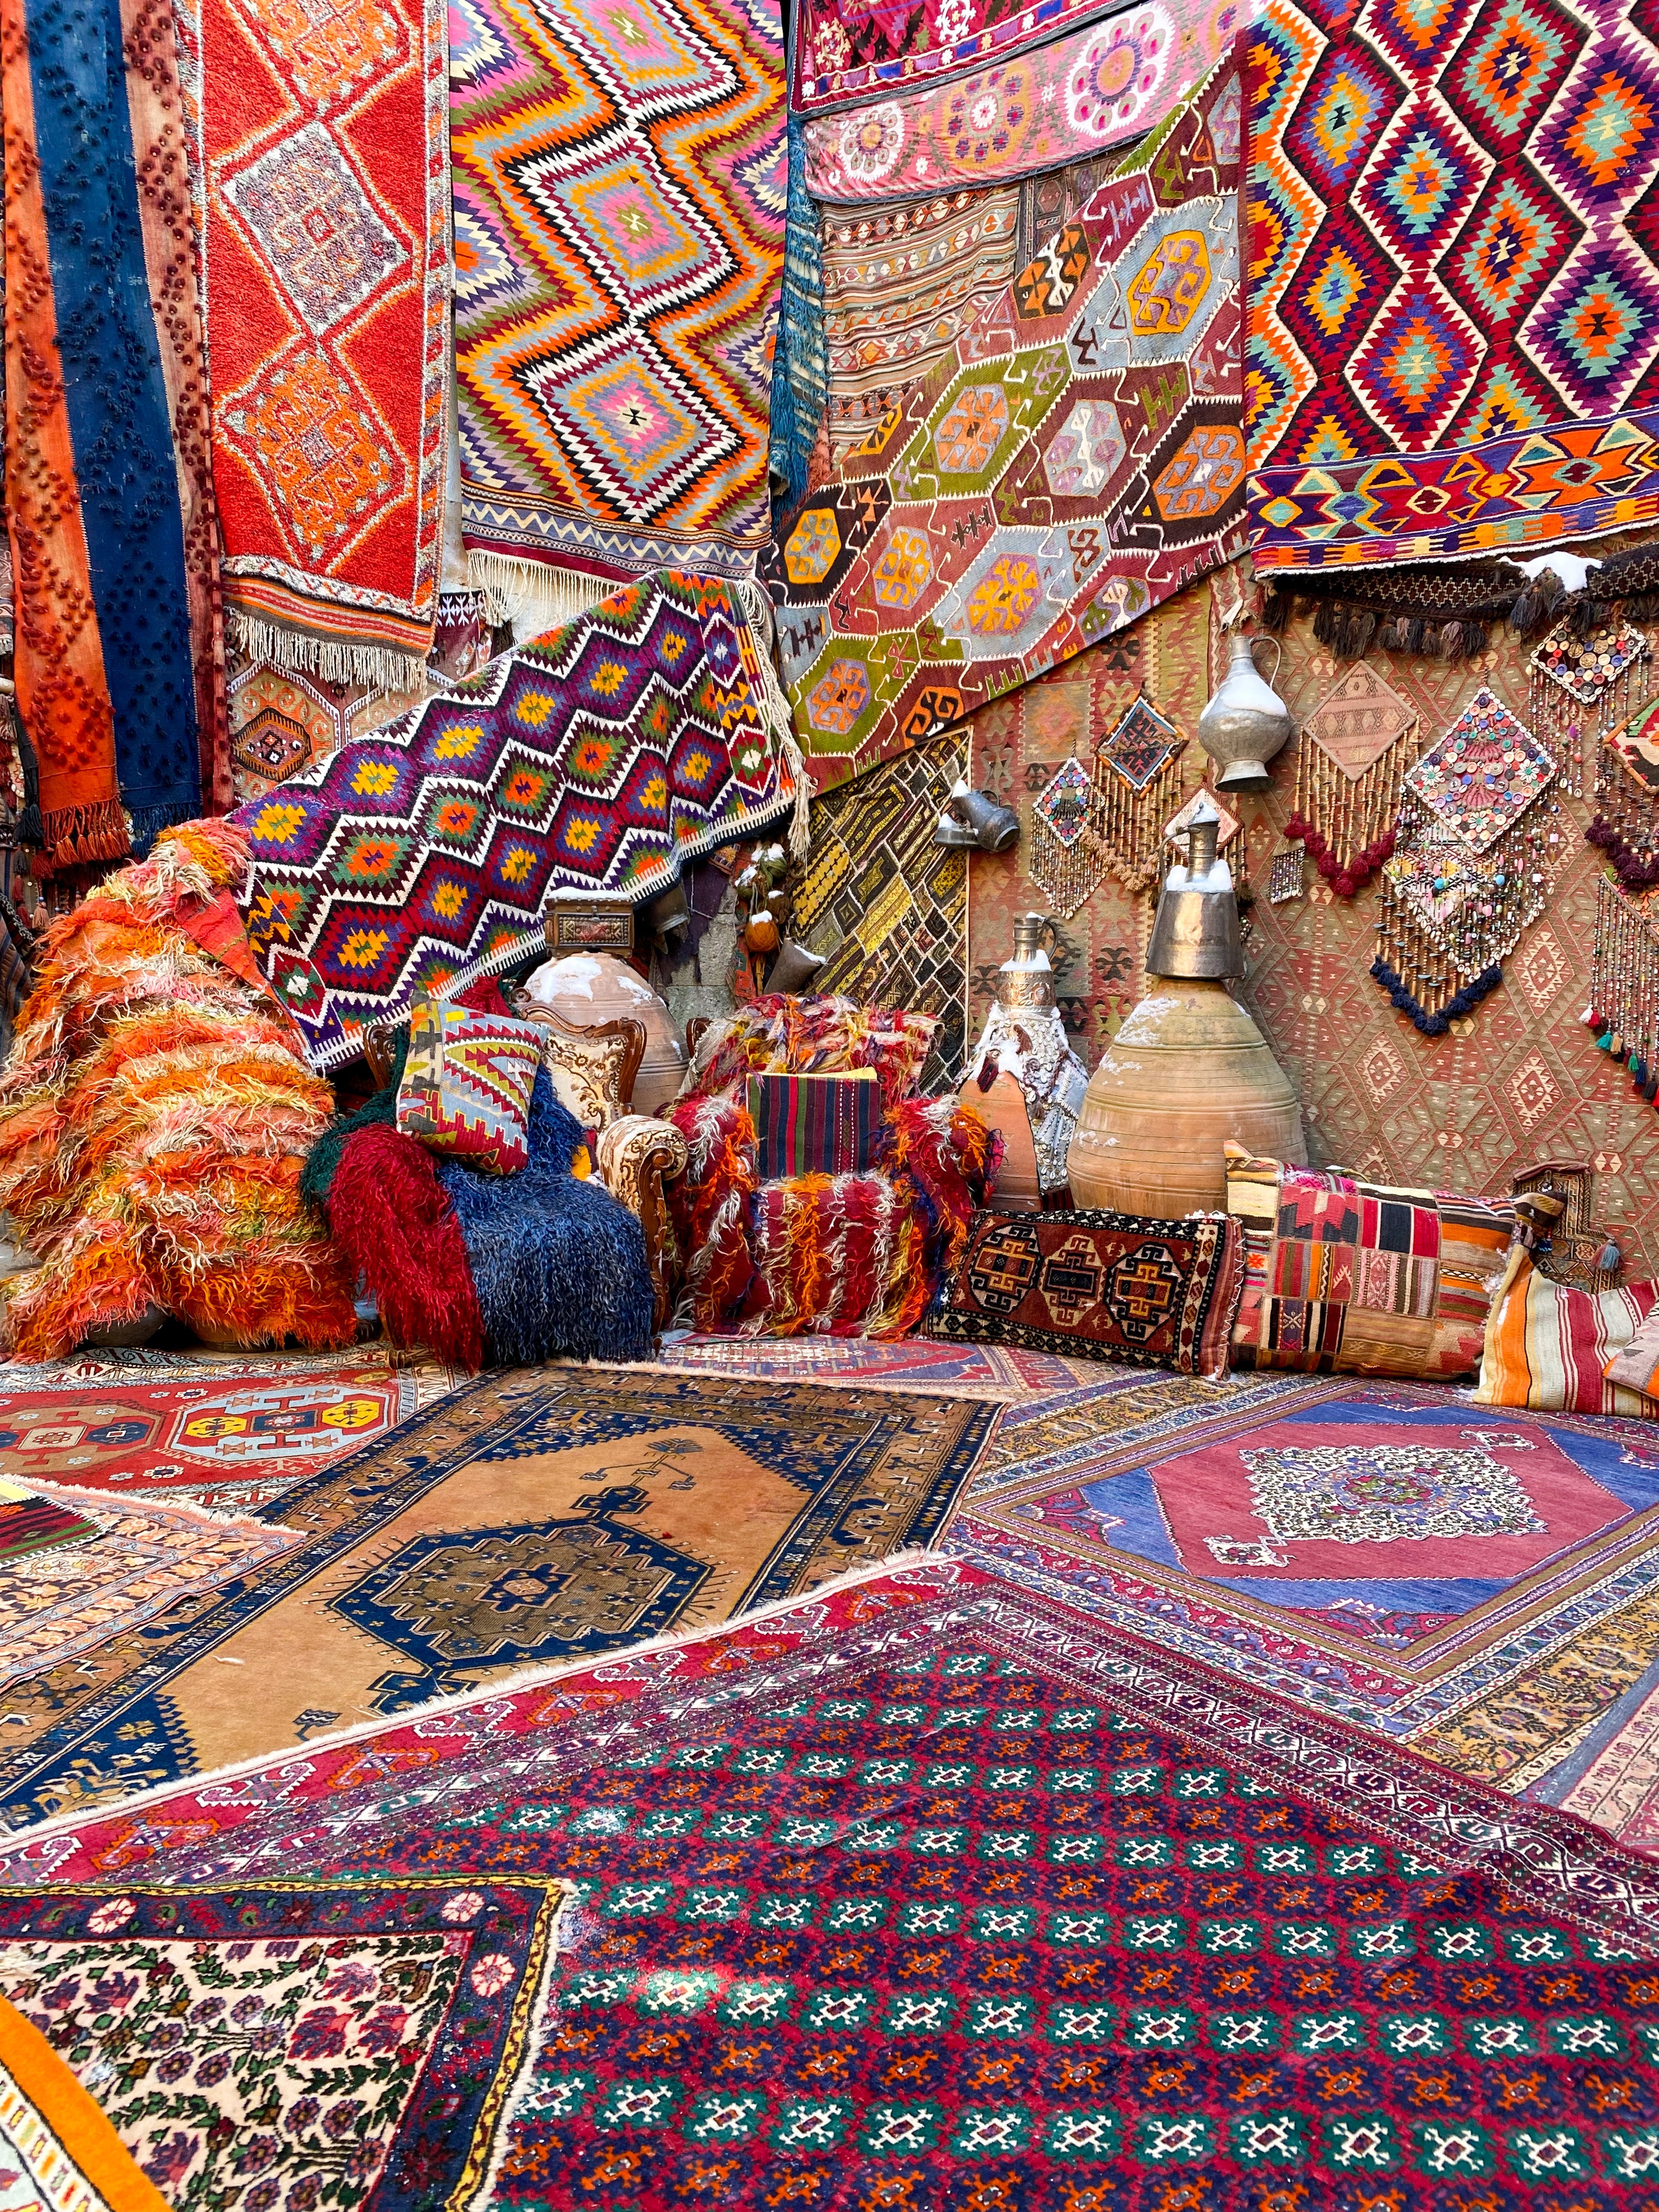 colorful and bright Turkish rugs of different sizes staged together in a showroom. Geometric Turkish pillows surrounding the rugs on the floor.